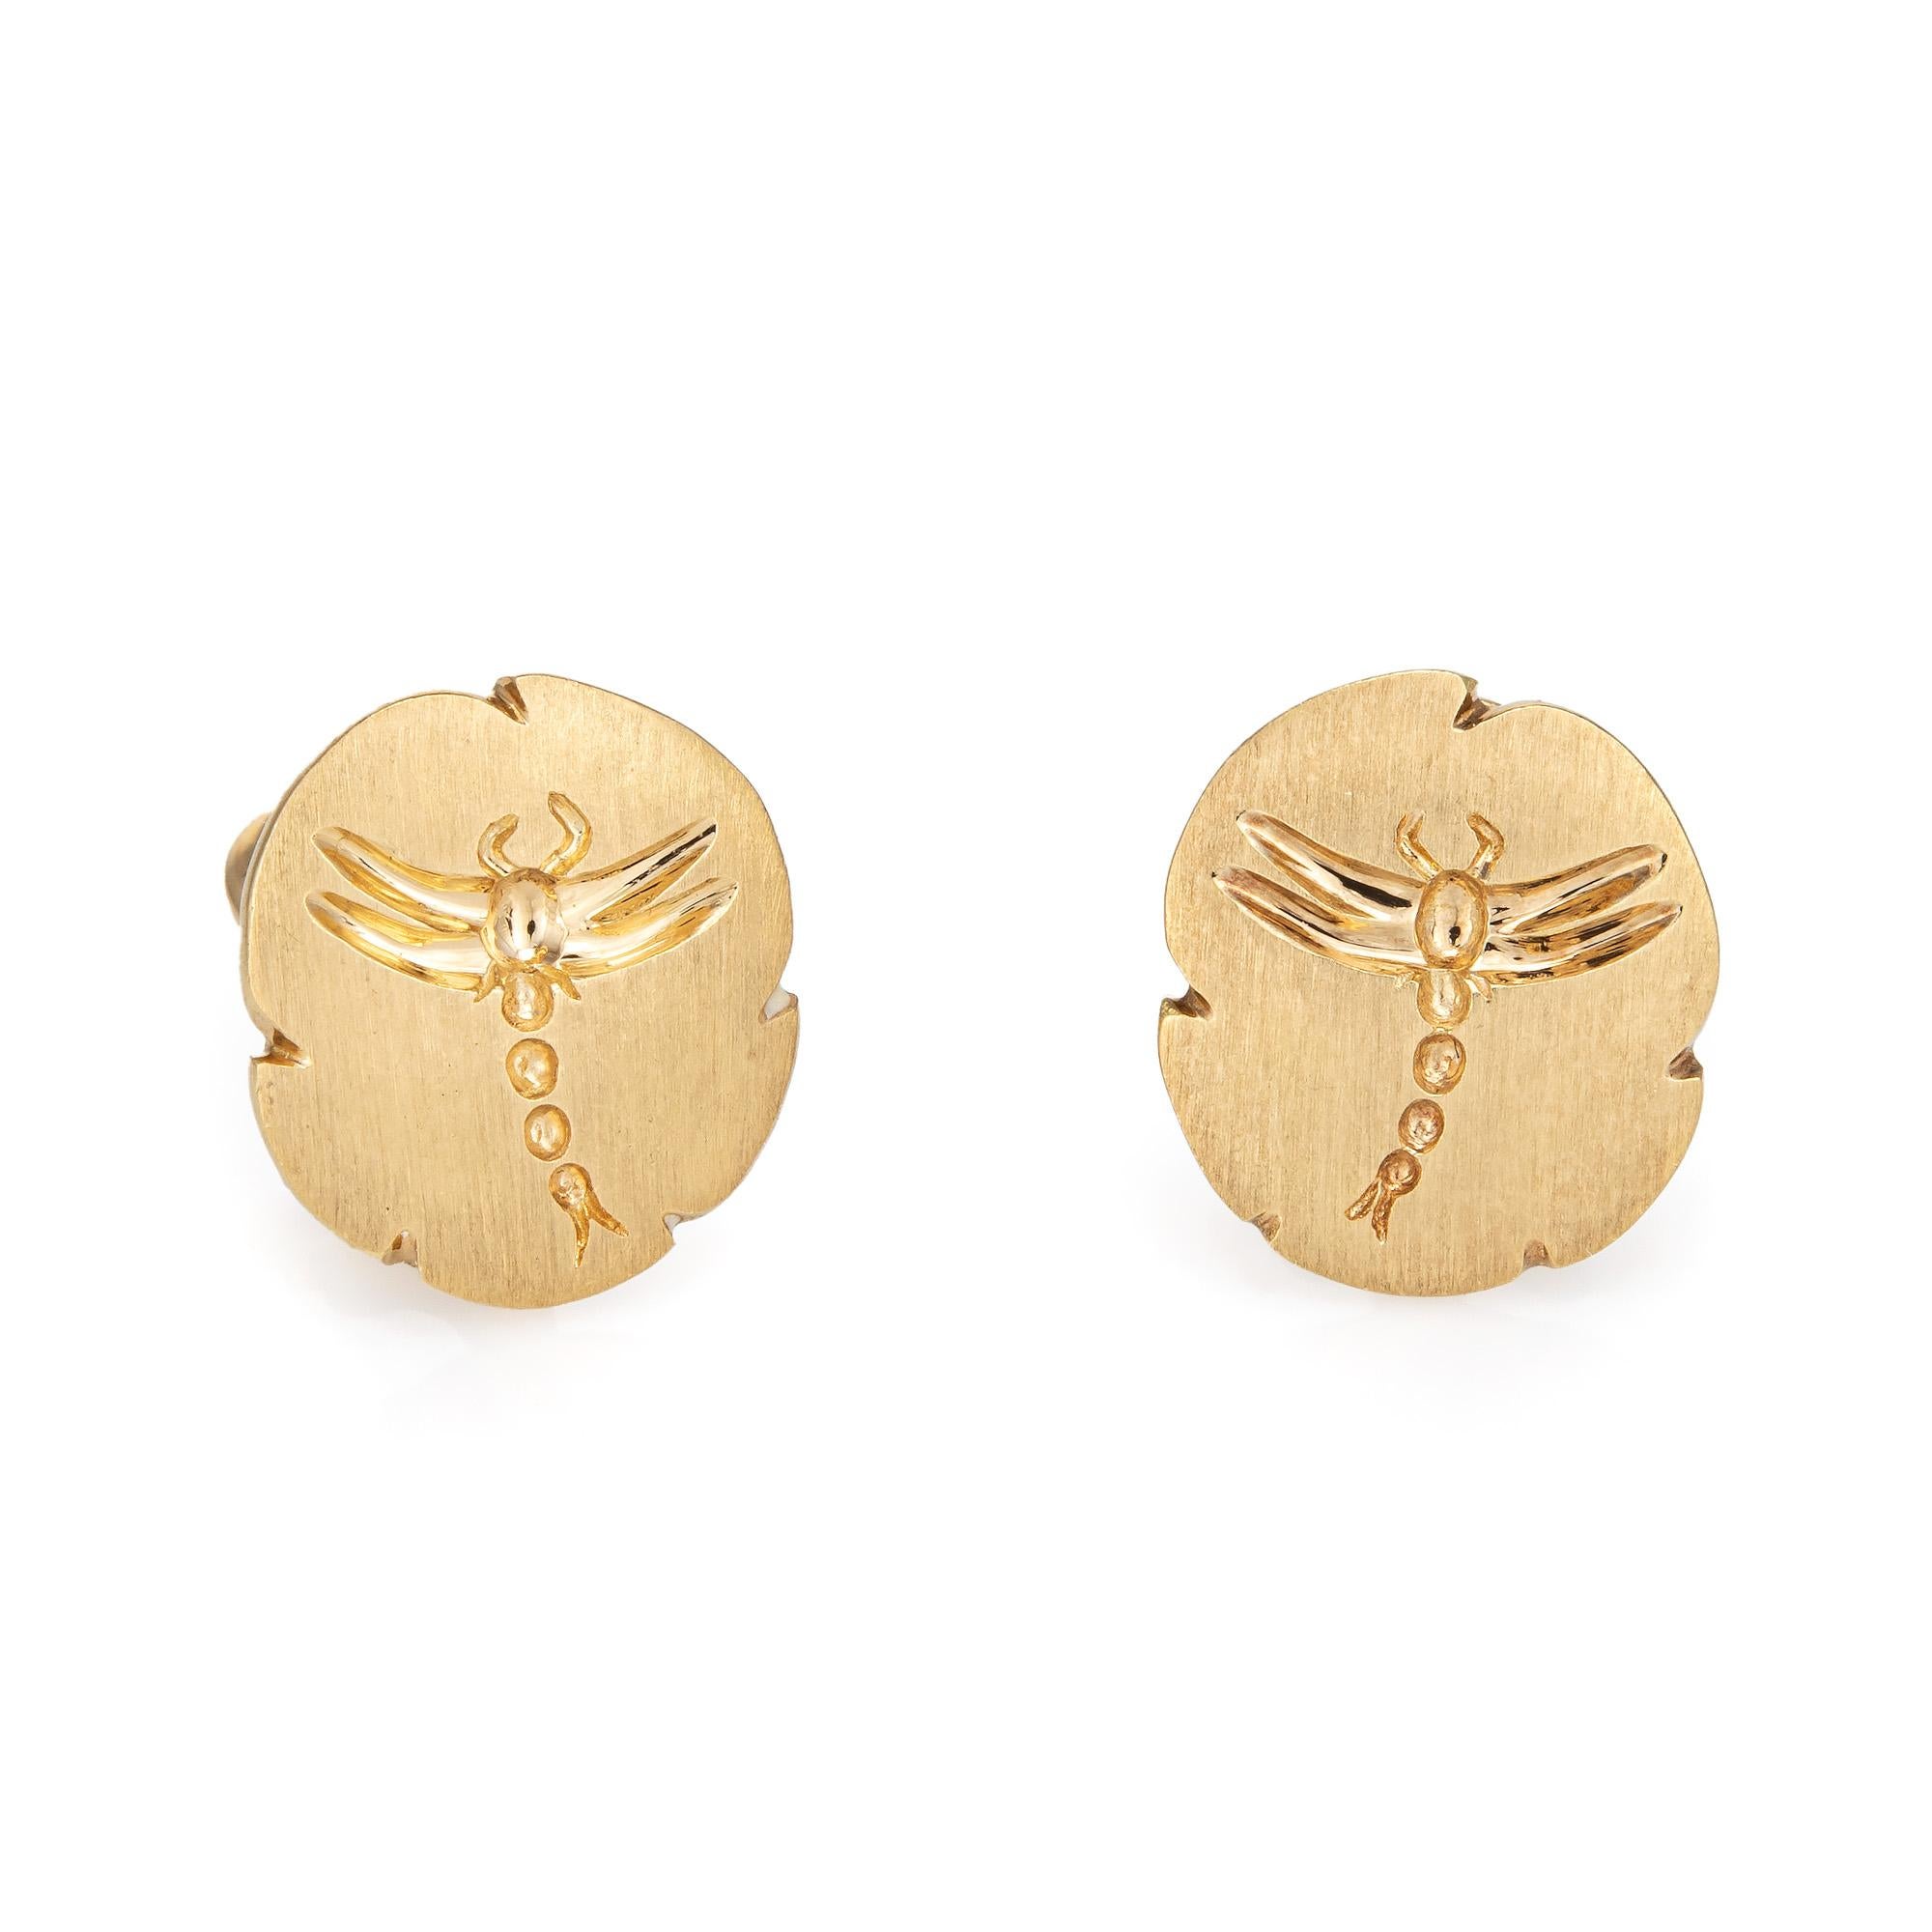 Finely detailed pair of vintage Tiffany & Co dragonfly earrings crafted in 18k yellow gold (circa 1980s). 

The dragonfly is a symbol of transformation, change and adaptability. The surface of the earrings features a satin finish with the